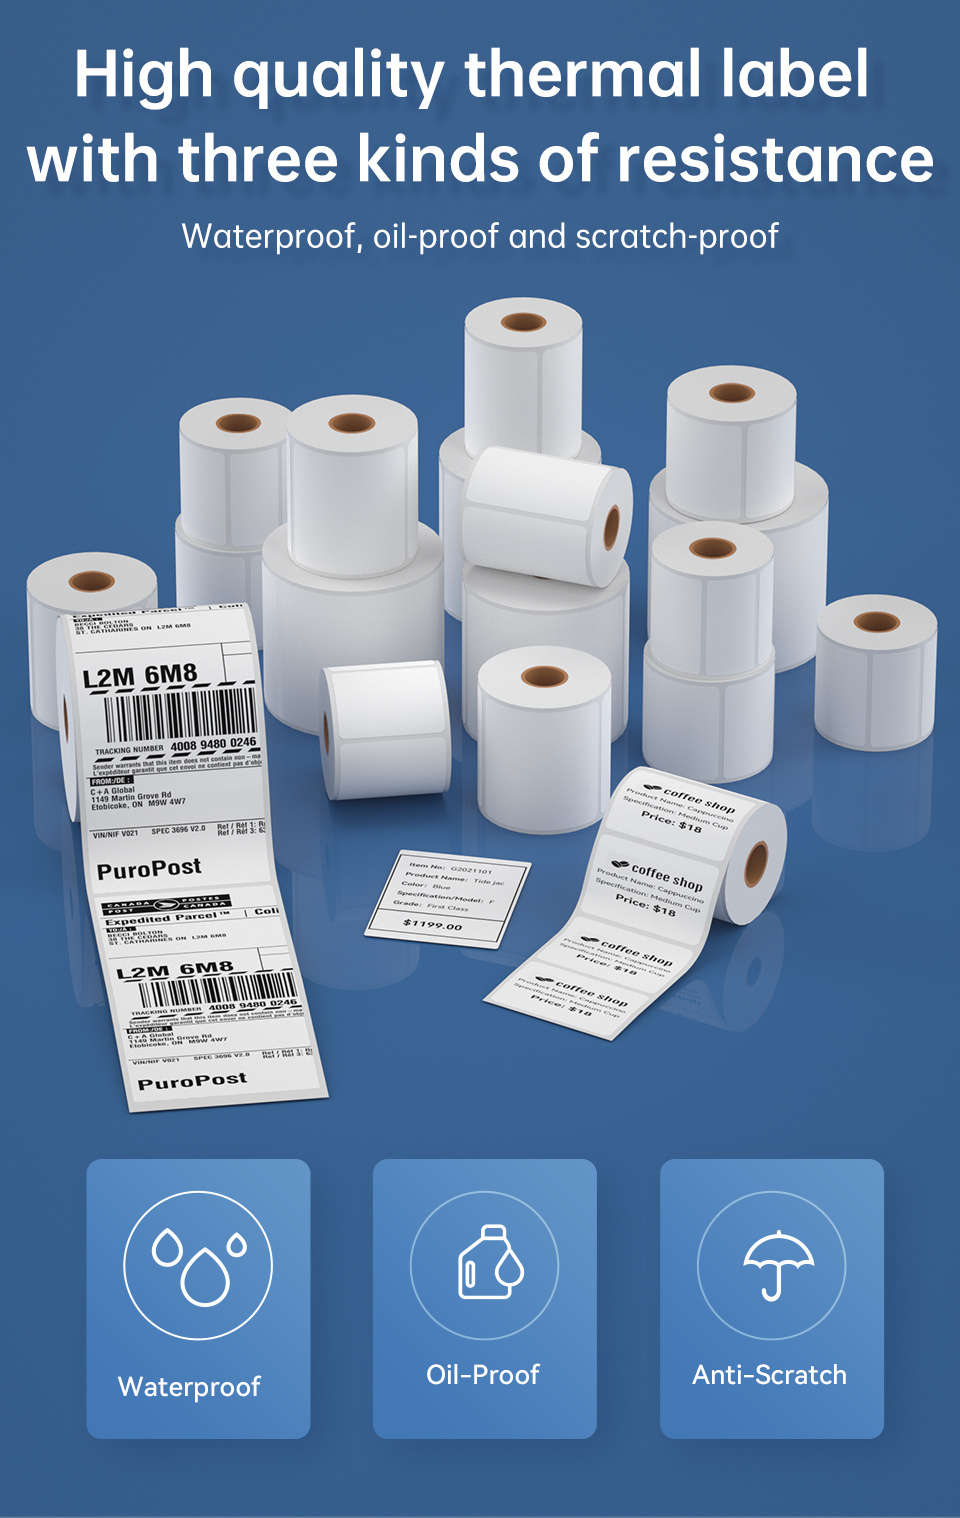 multifunctional self adhesive label paper shipping label mailing label supermarket label commercial grade label printing paper white compatible with thermal label printer waterproof oil proof details 0